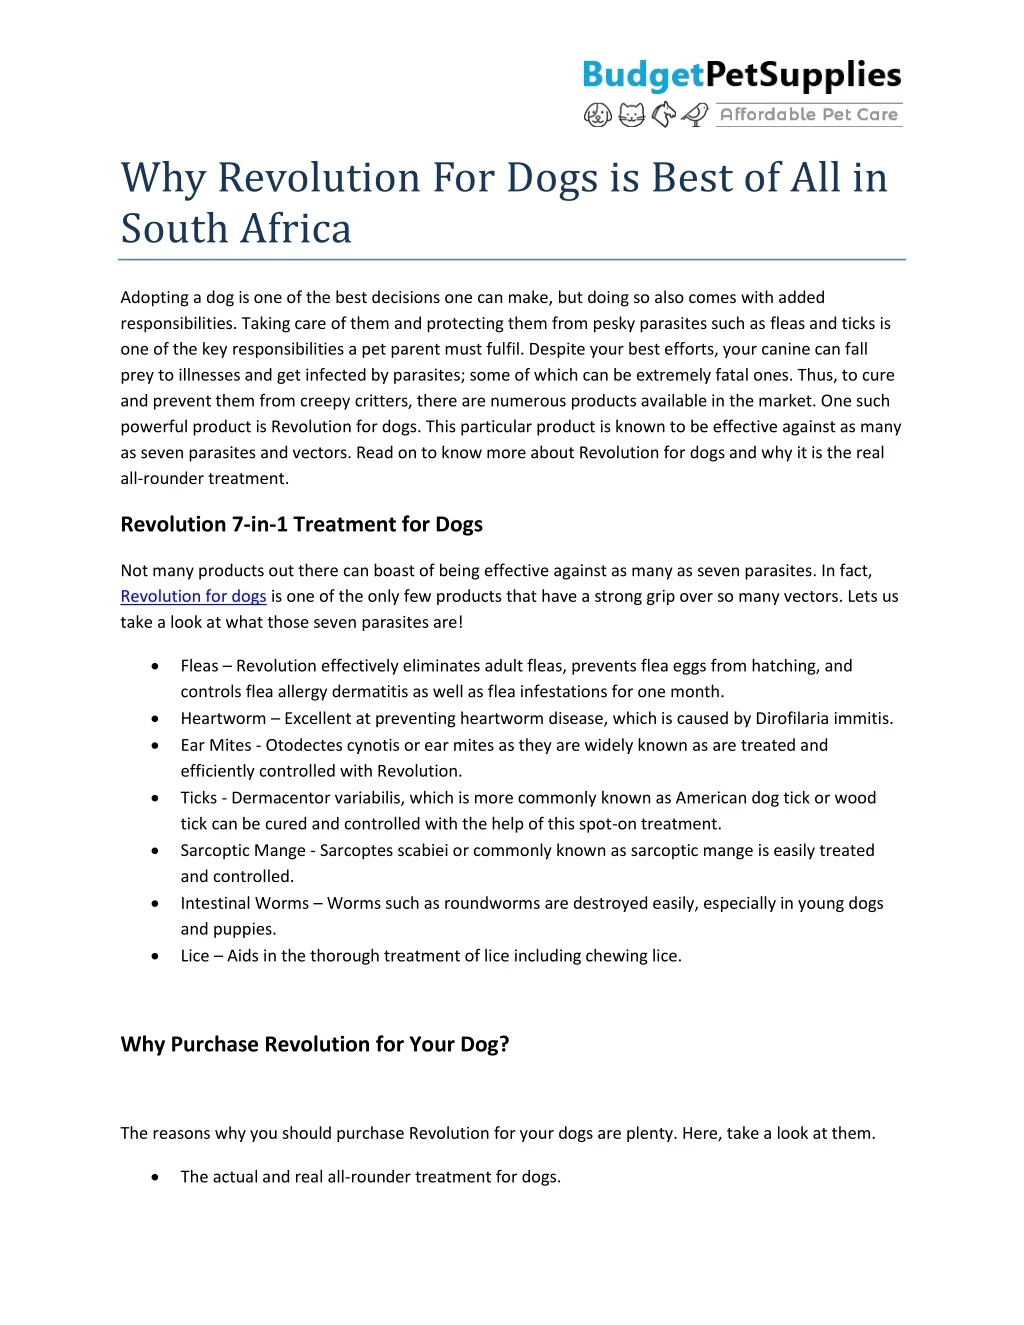 why revolution for dogs is best of all in south